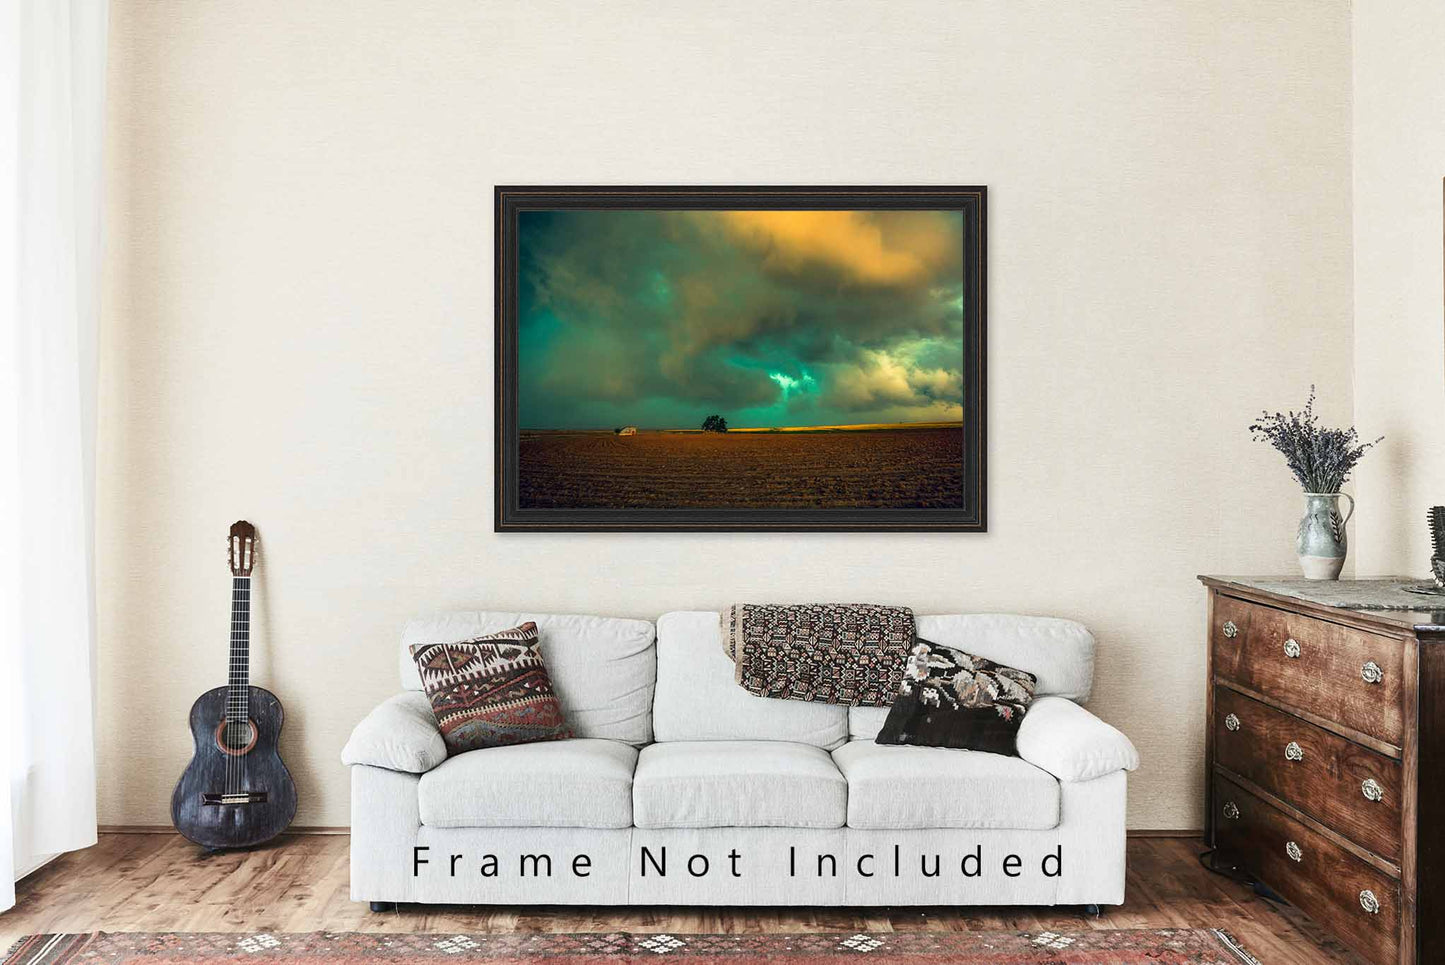 Oklahoma Landscape Photography Art Print - Vintage Style Picture of Dark Storm Clouds Over Dusty Field Fine Art Decor Sky Photo Nature Print